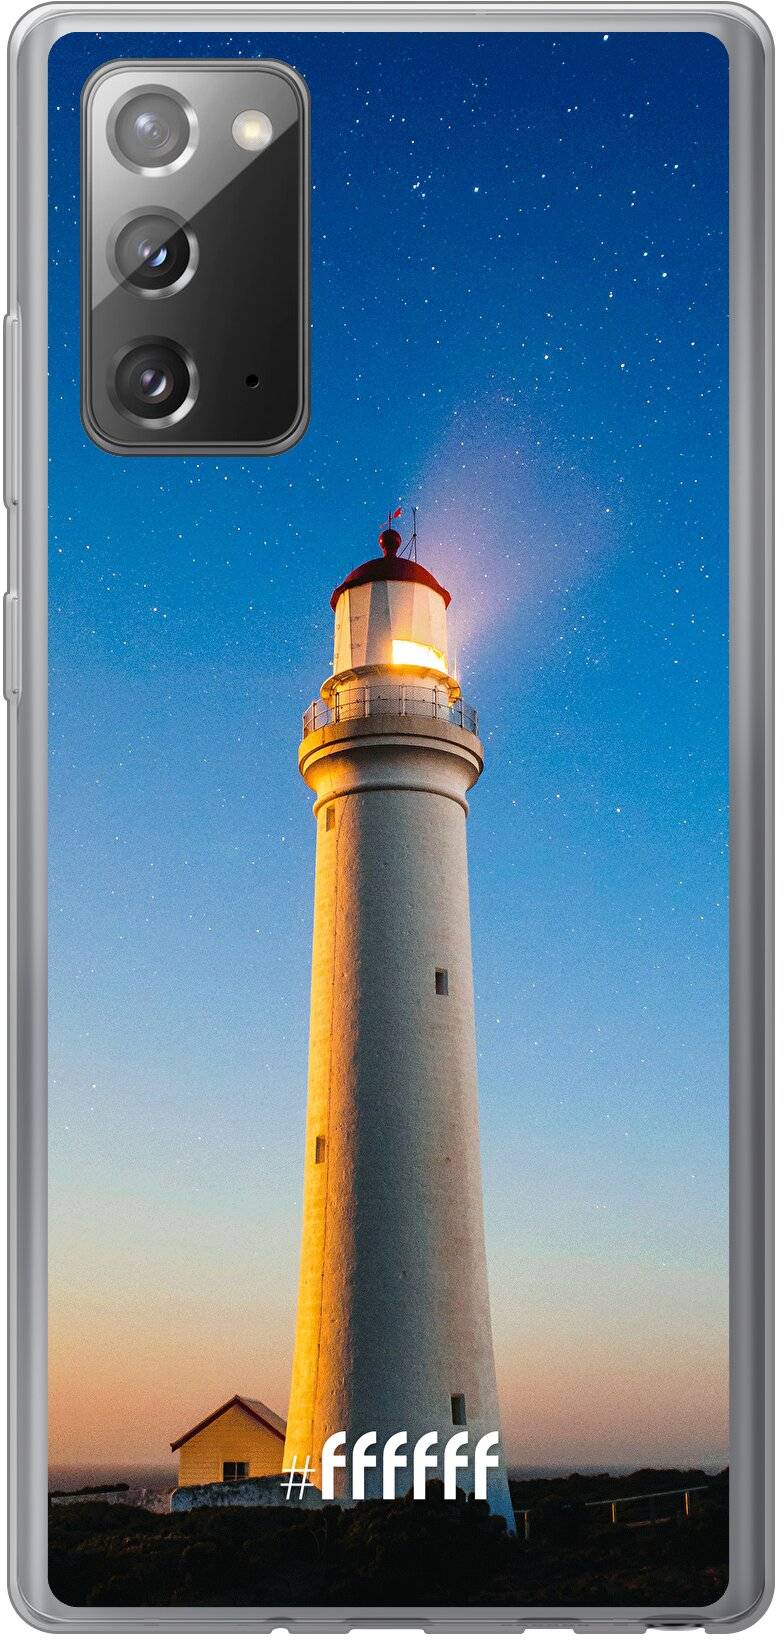 Lighthouse Galaxy Note 20